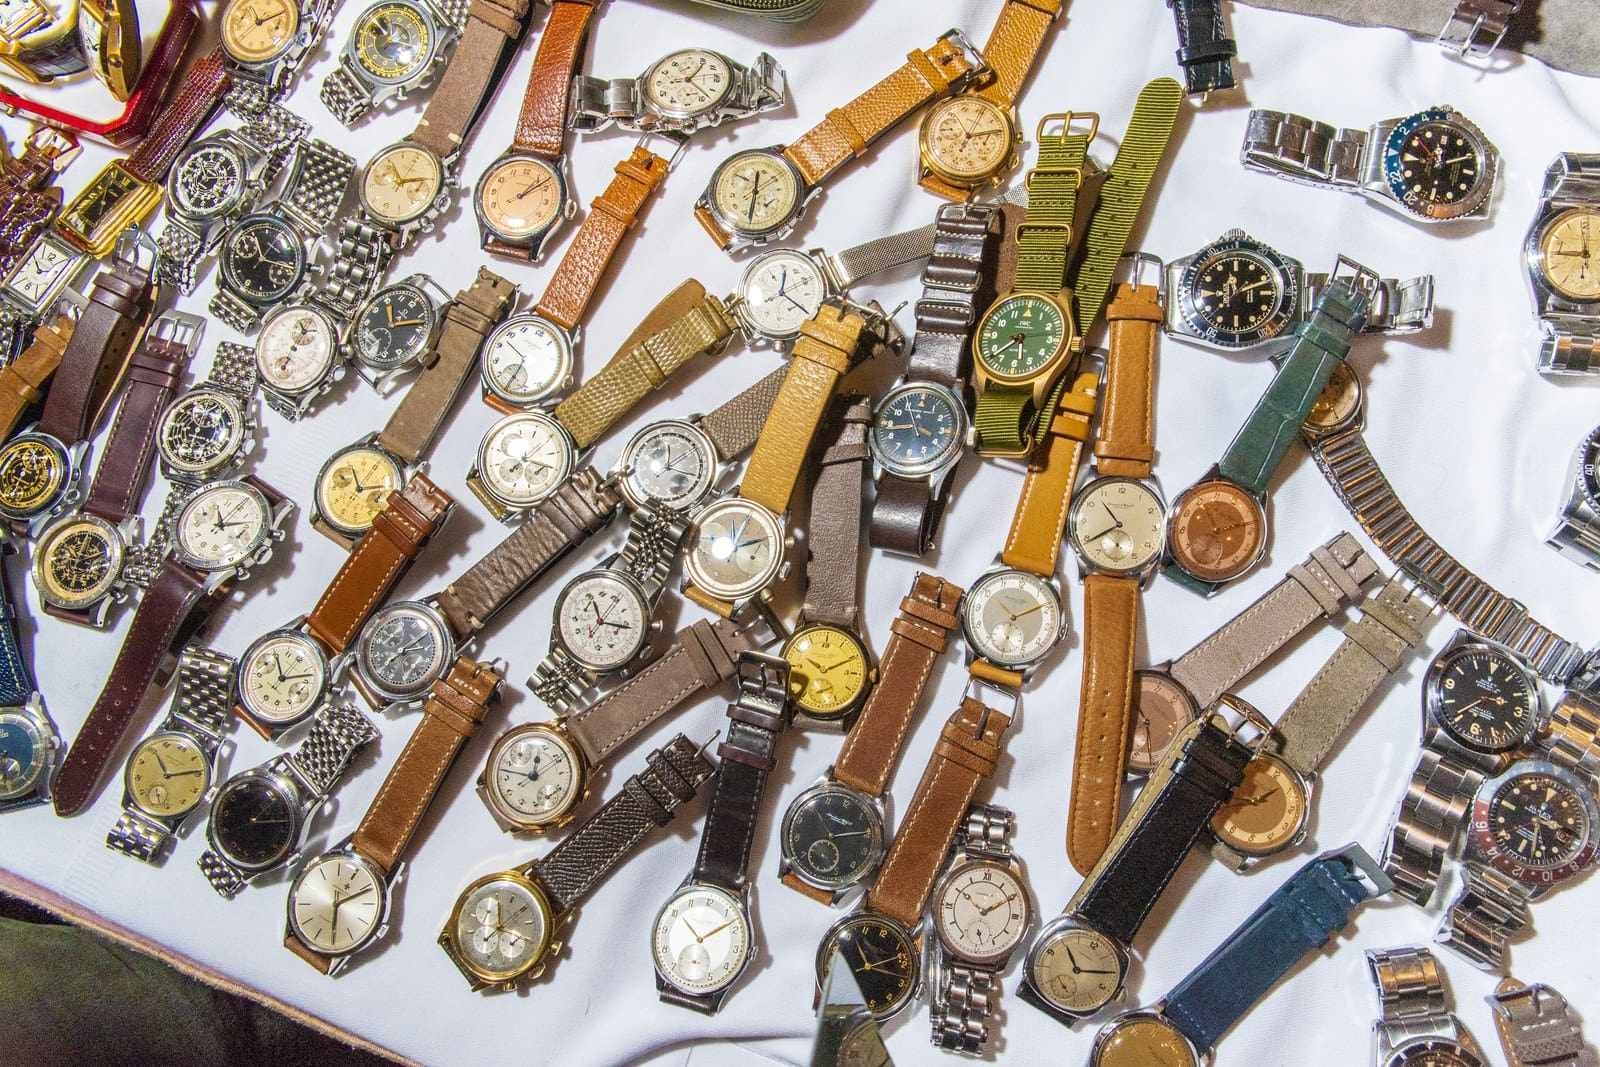 RECOMMENDED READING: The World Economic Forum of the vintage watch market